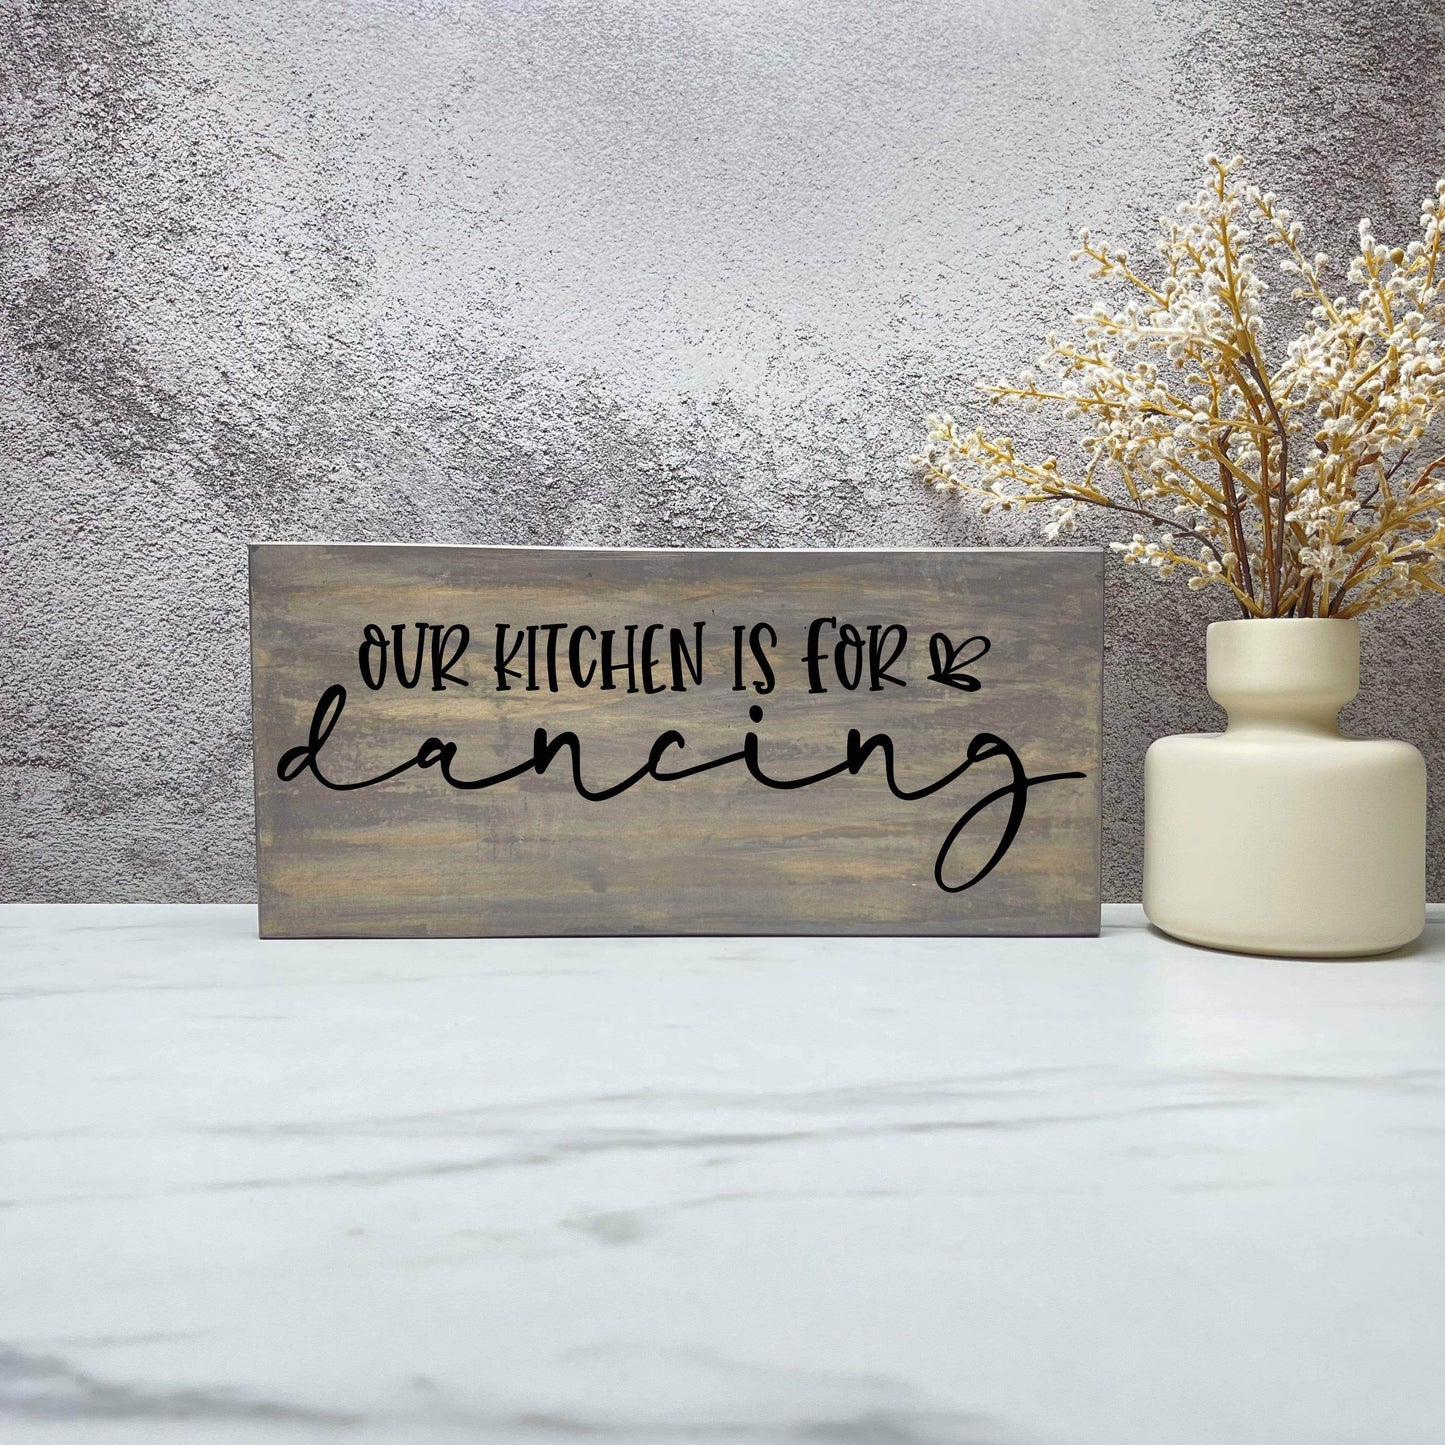 Our Kitchen is For Dancing, kitchen wood sign, kitchen decor, home decor